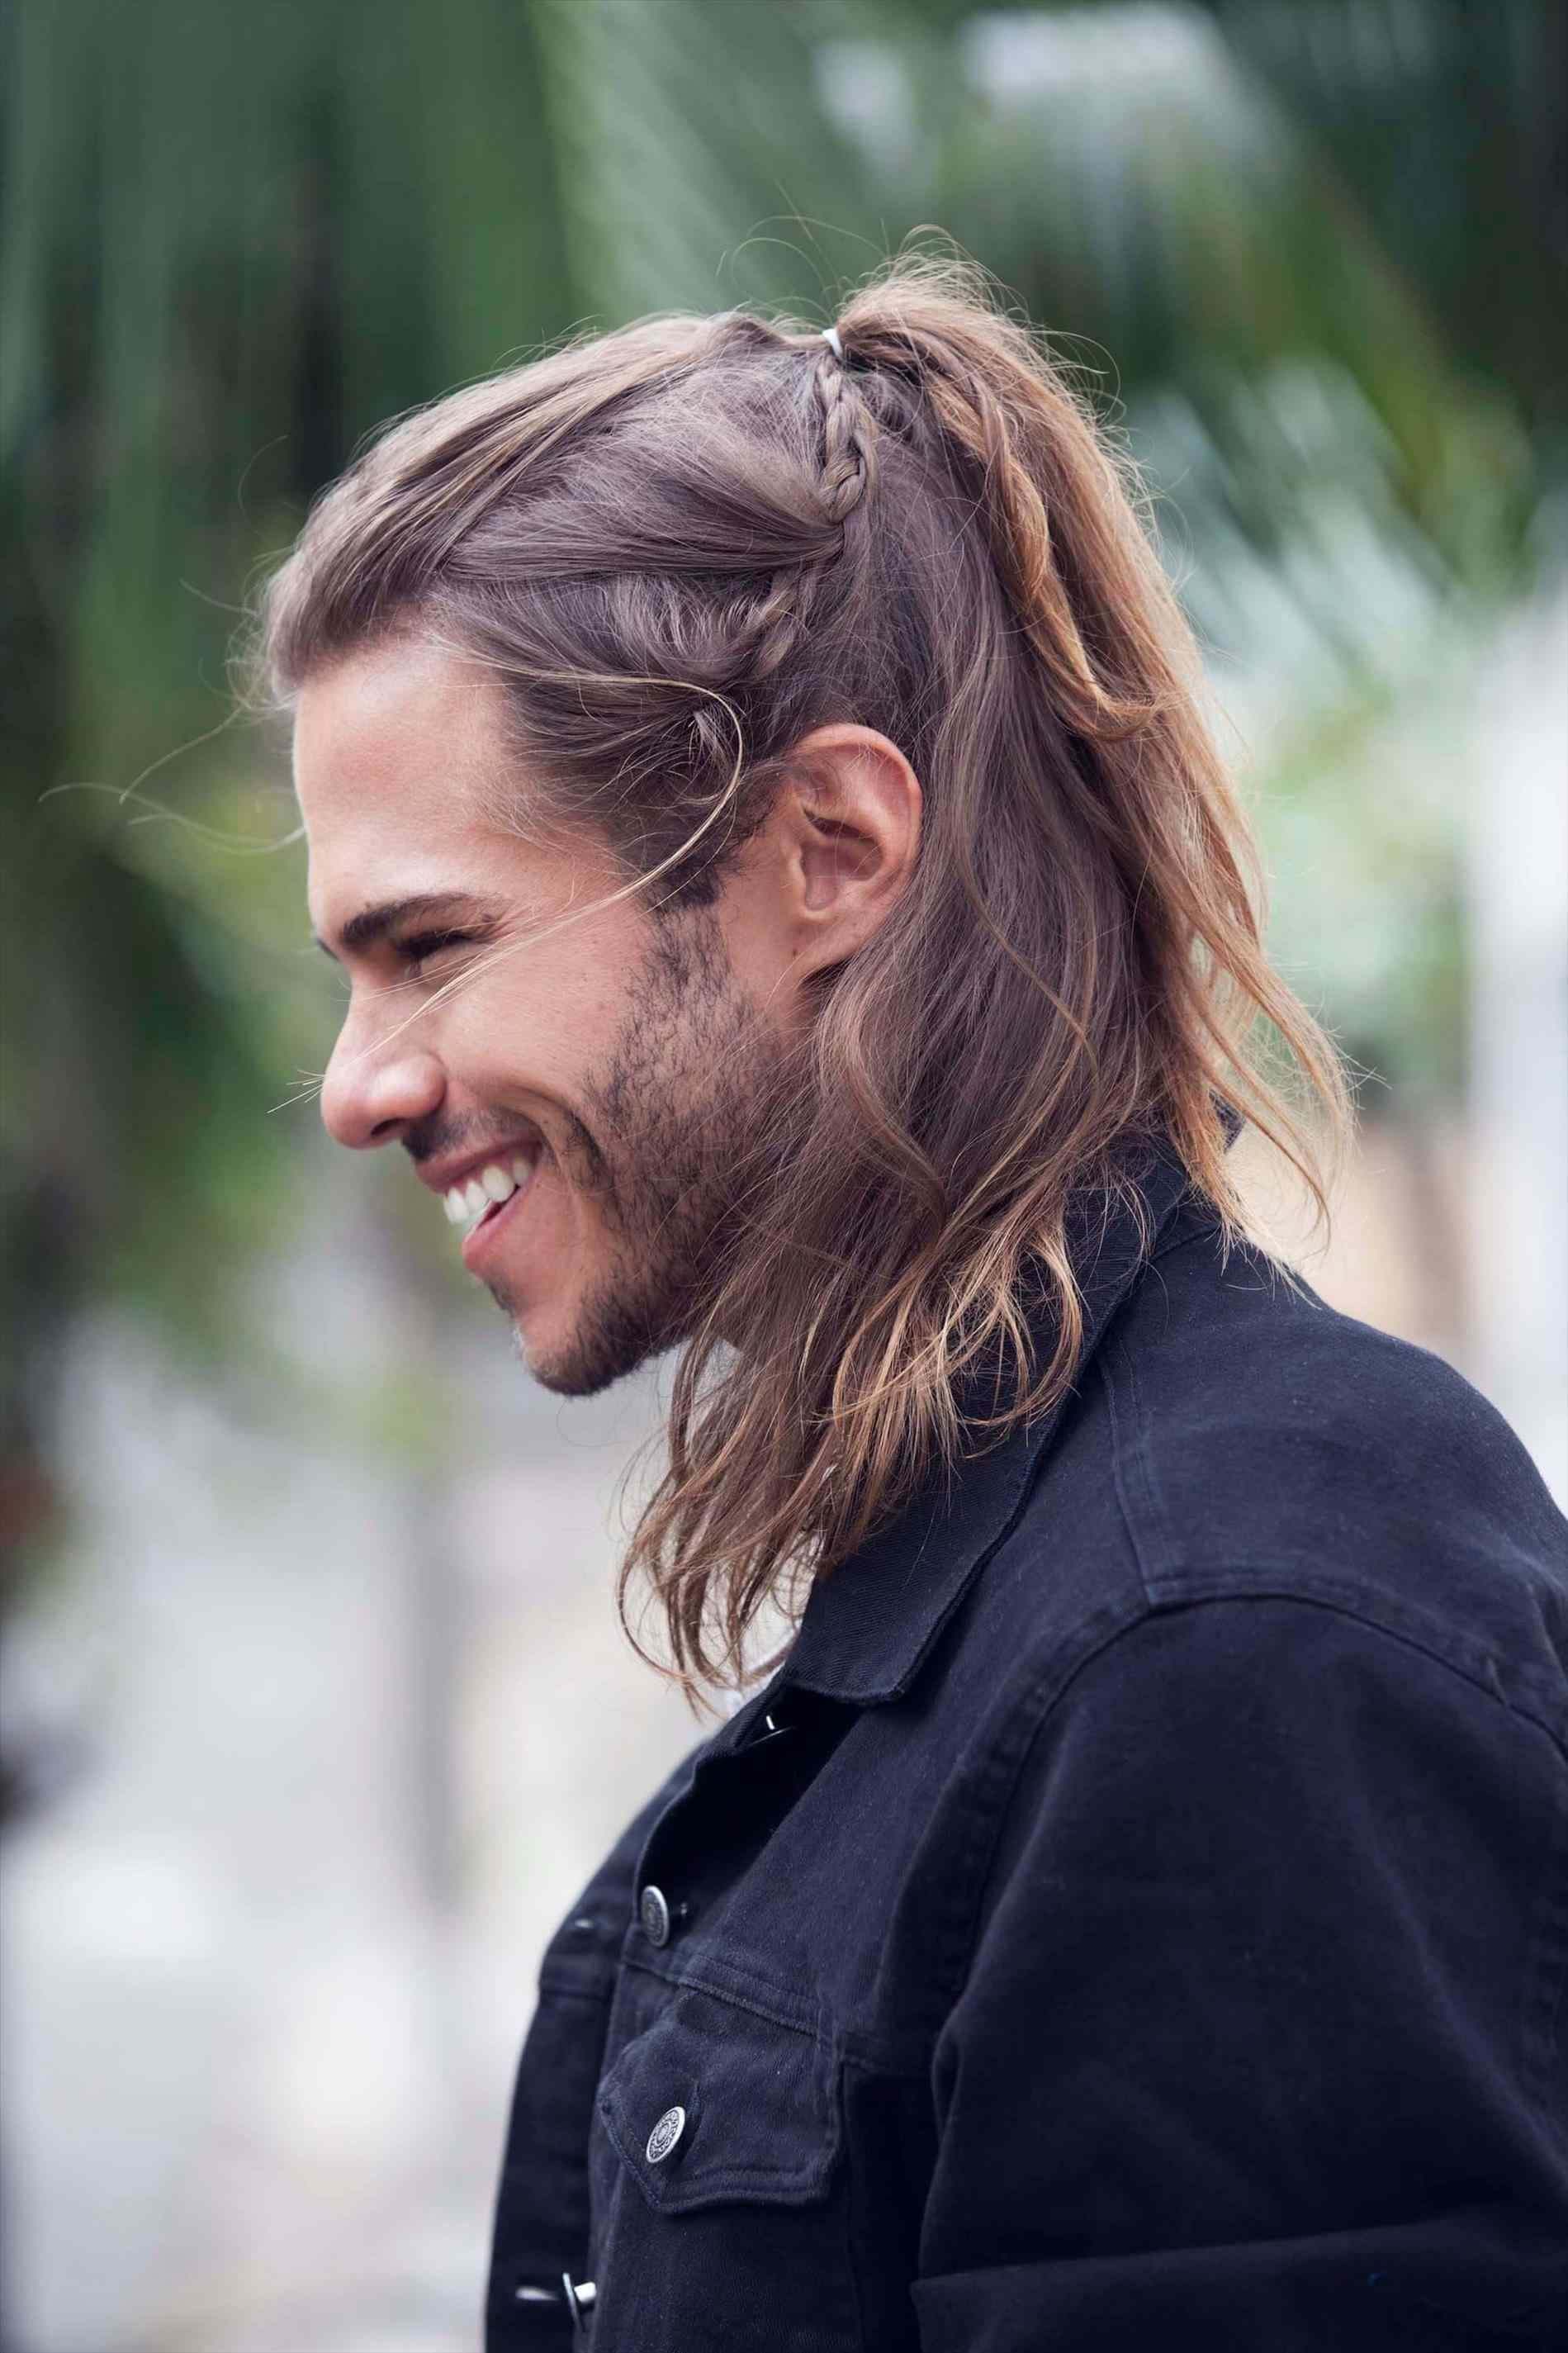 Top 10 Stylish White Men with Braids ideas in 2023